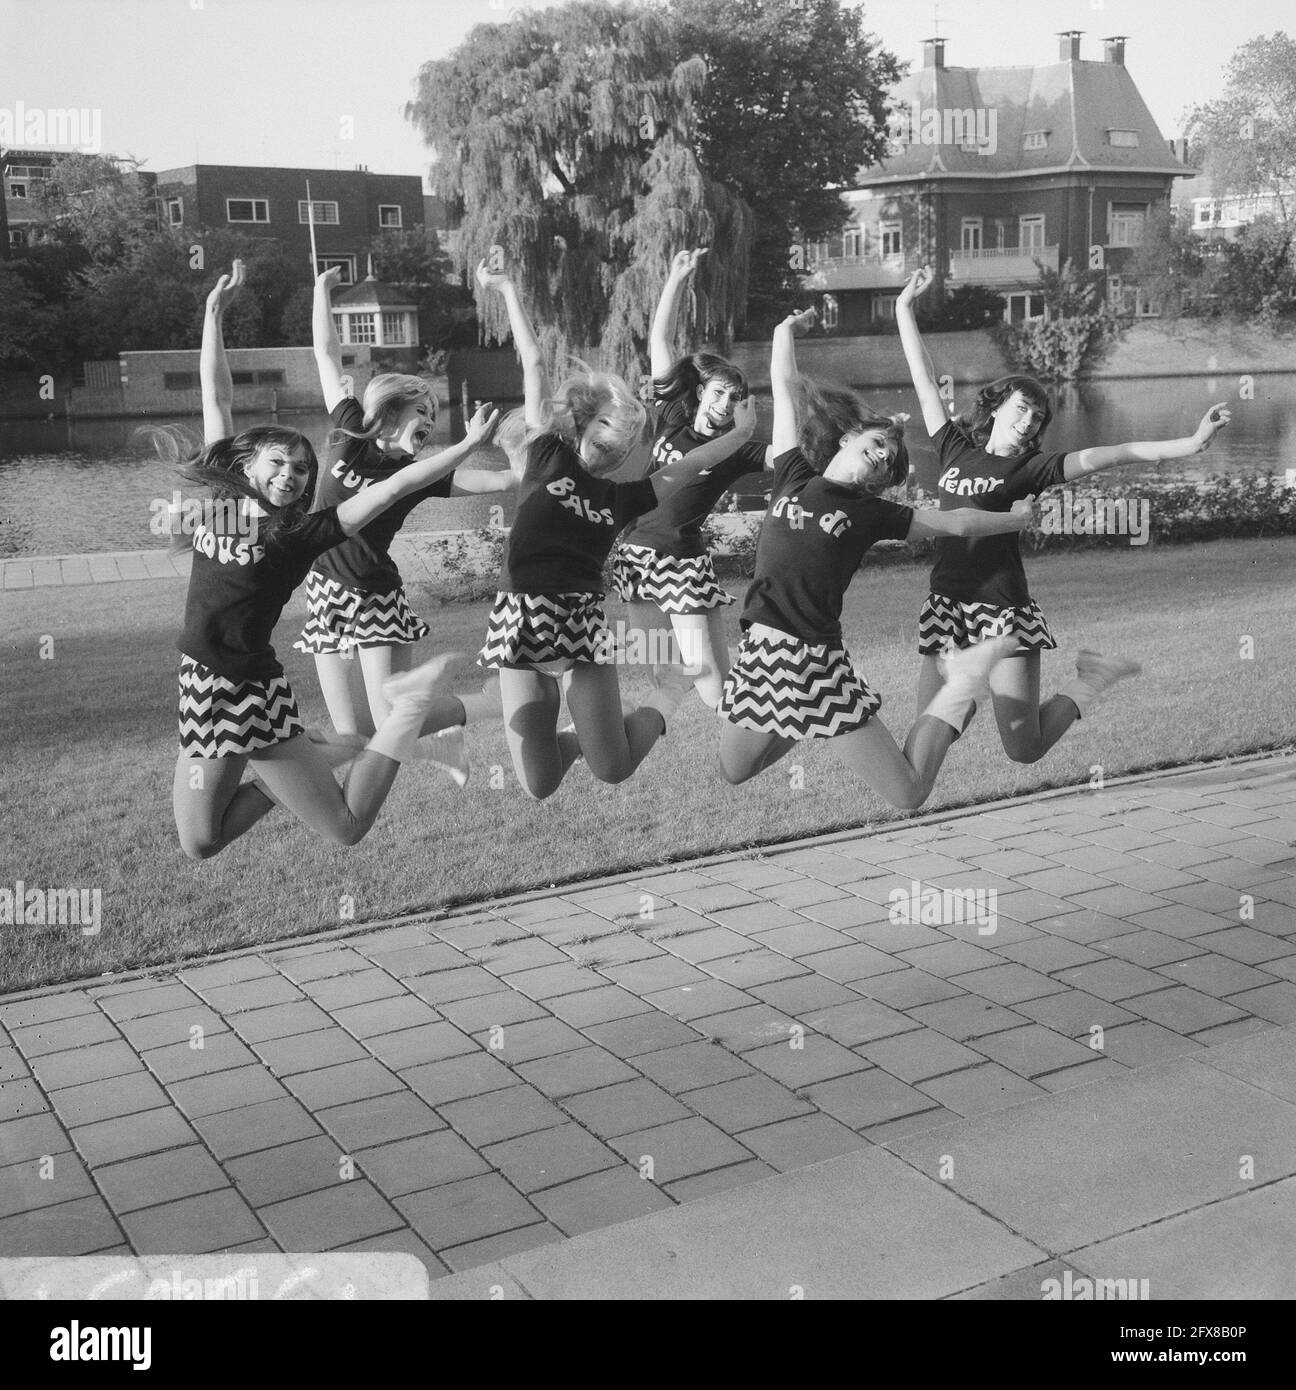 Beat Girls dance in front of Hilton hotel entrance, September 22, 1966, dancers, hotels, The Netherlands, 20th century press agency photo, news to remember, documentary, historic photography 1945-1990, visual stories, human history of the Twentieth Century, capturing moments in time Stock Photo